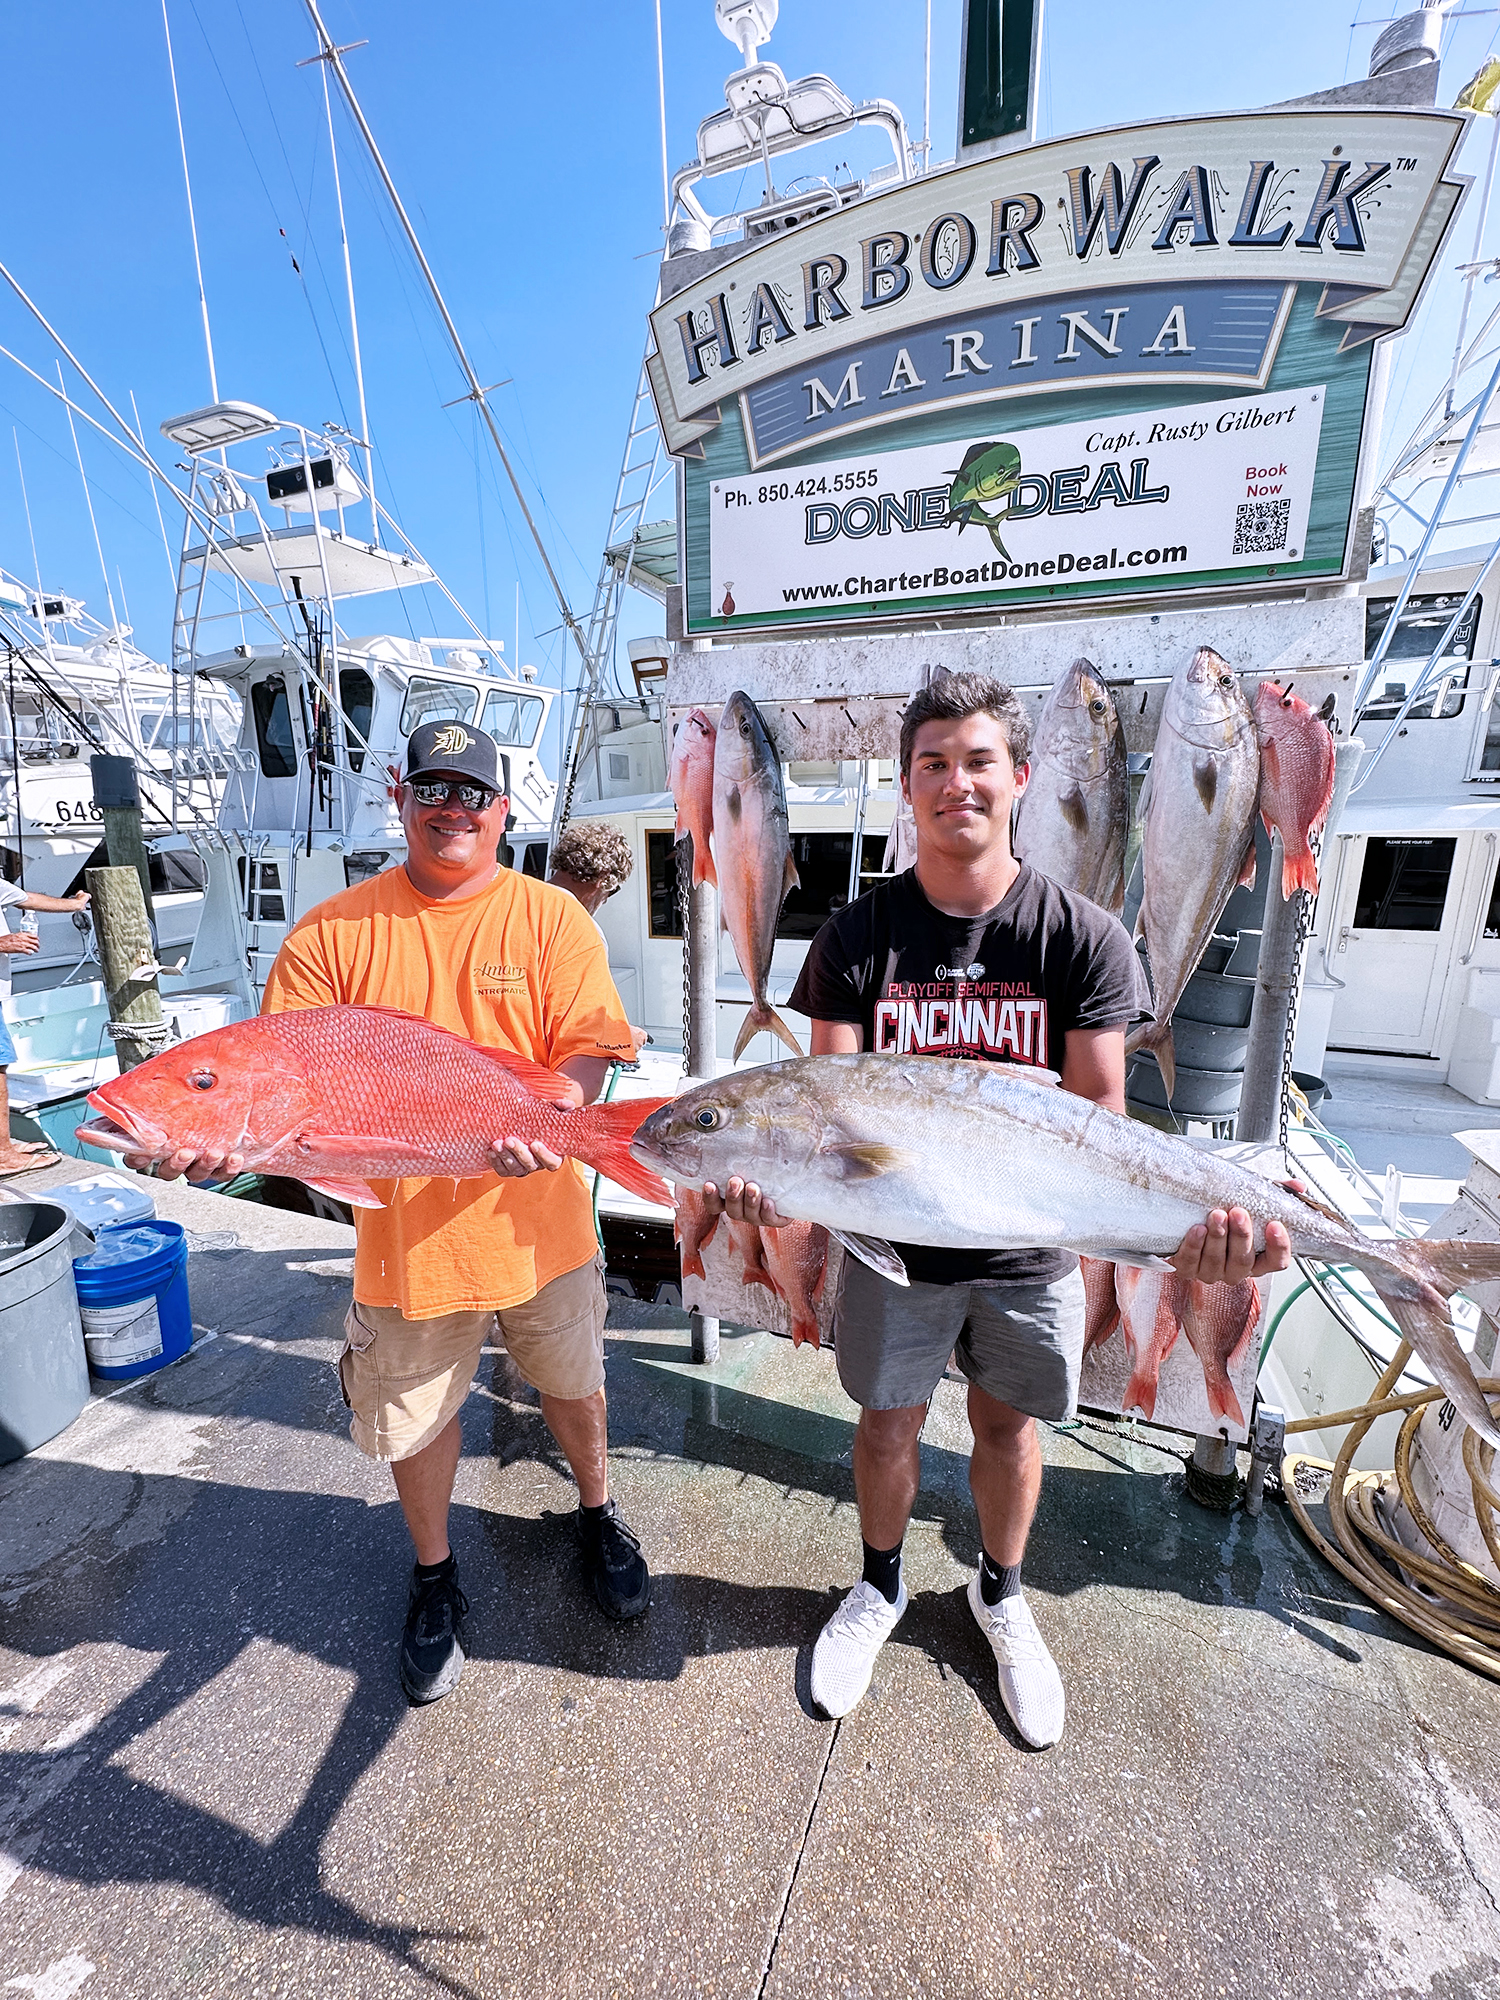 amberjack and red snapper fishing destin florida done deal